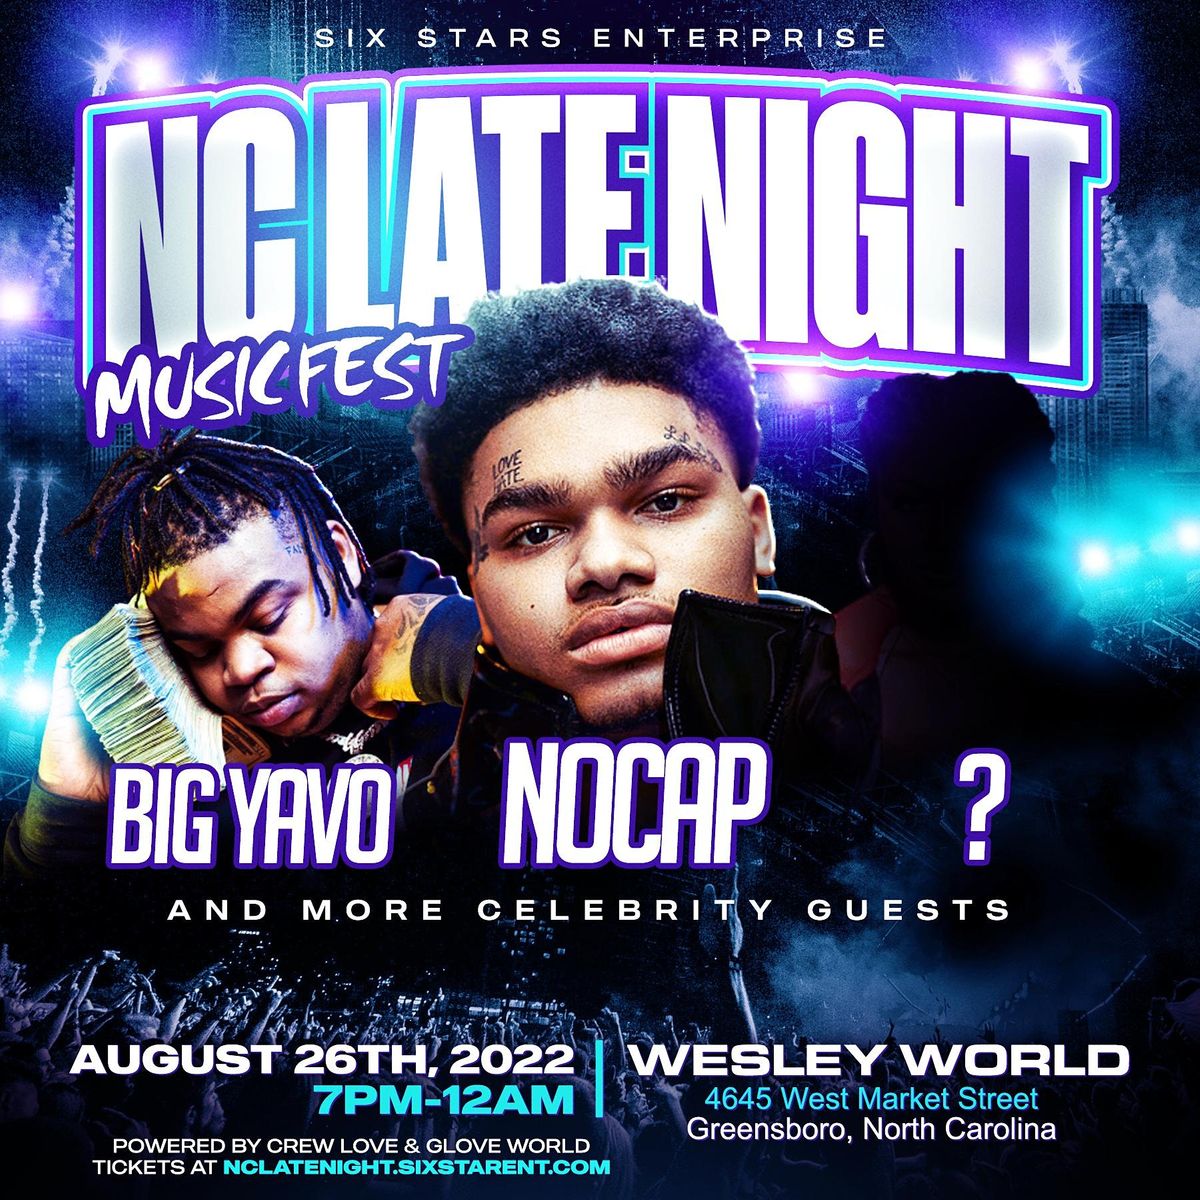 NC Late Night Music Fest(Nocap, Big Yavo, Kali & More Celebrity Guests